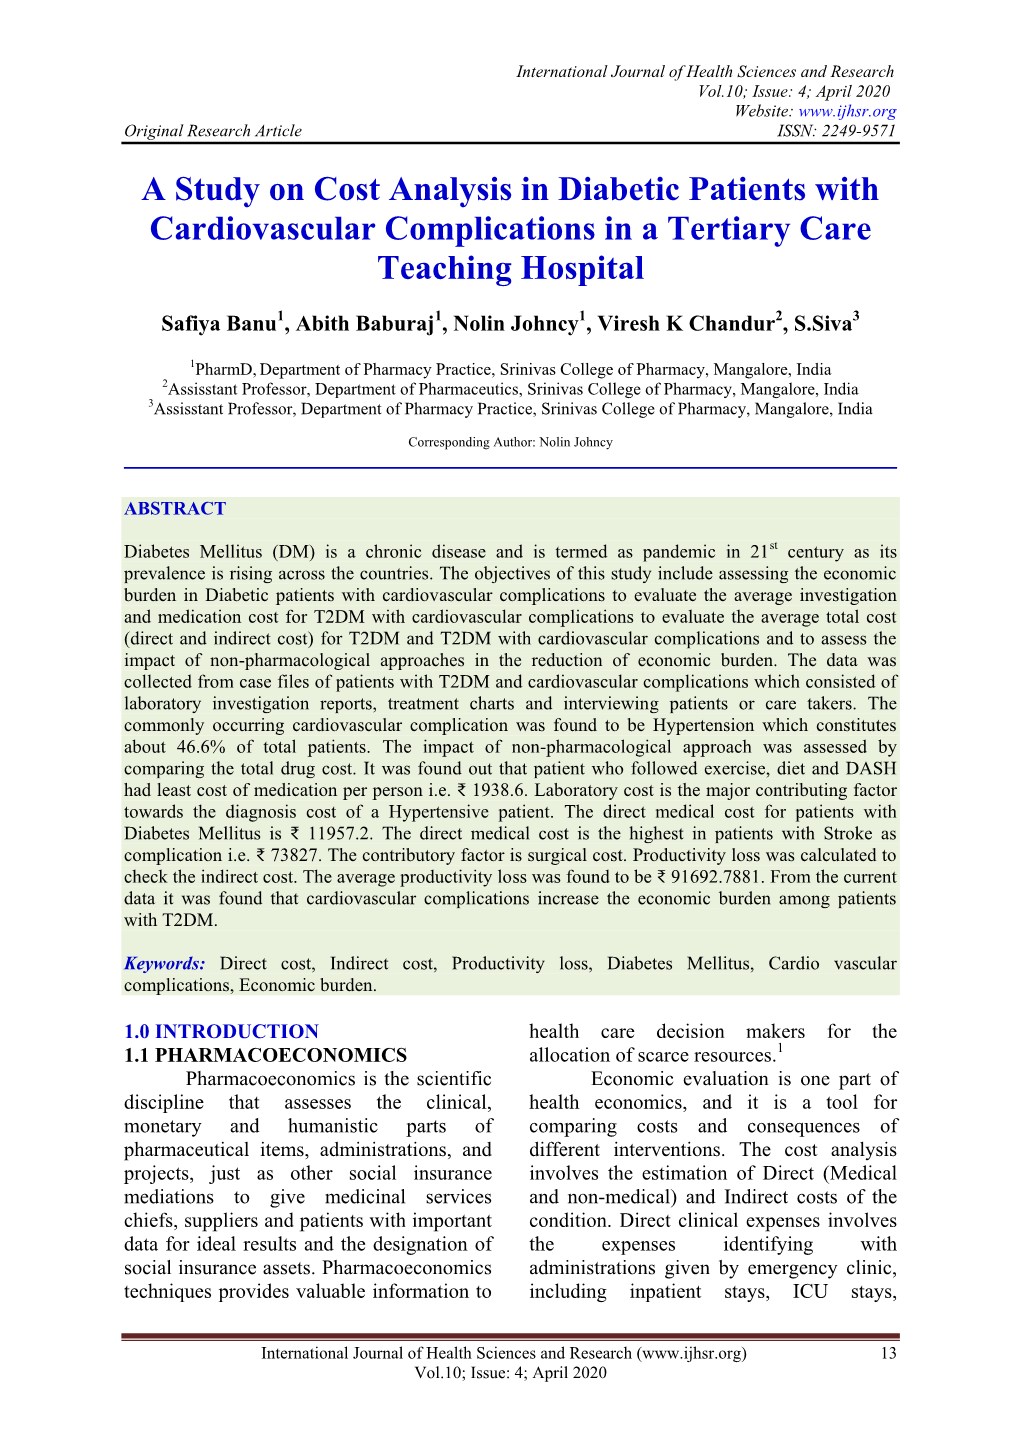 A Study on Cost Analysis in Diabetic Patients with Cardiovascular Complications in a Tertiary Care Teaching Hospital